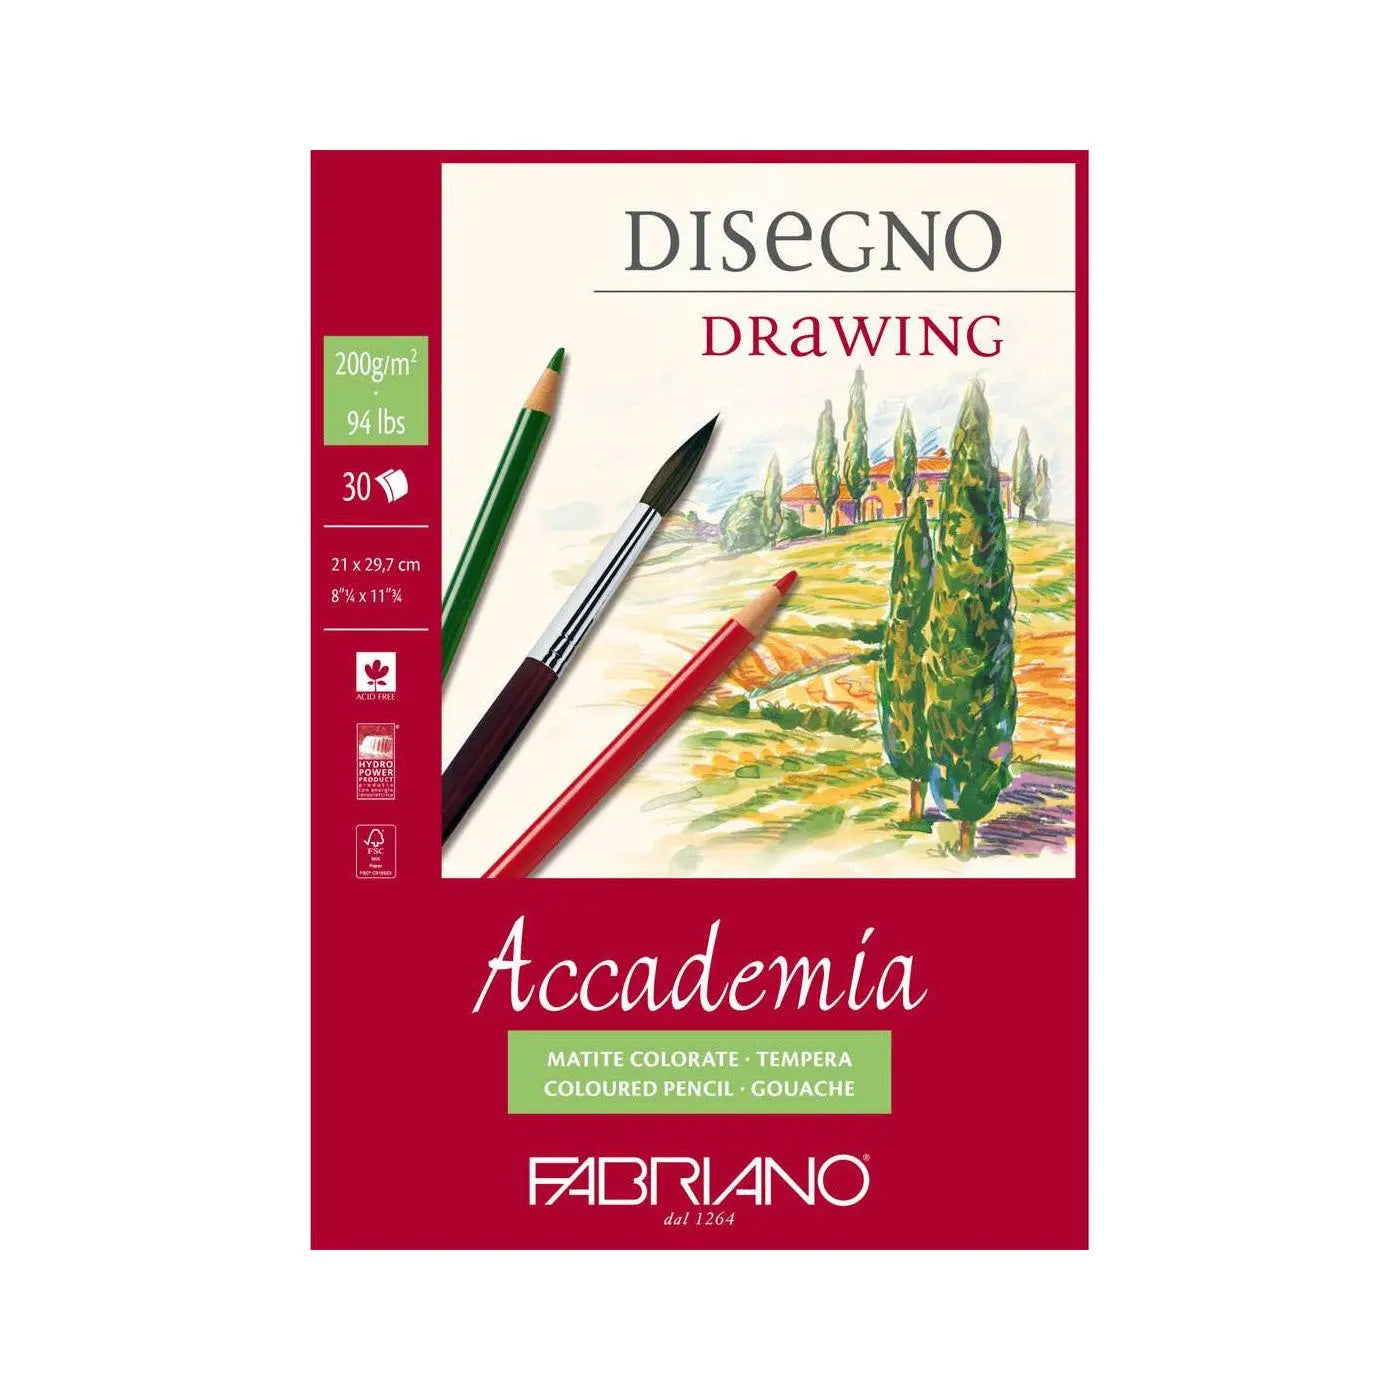 Fabriano Accademia Disegno Drawing And Schizzi Sketching Pads Canvazo